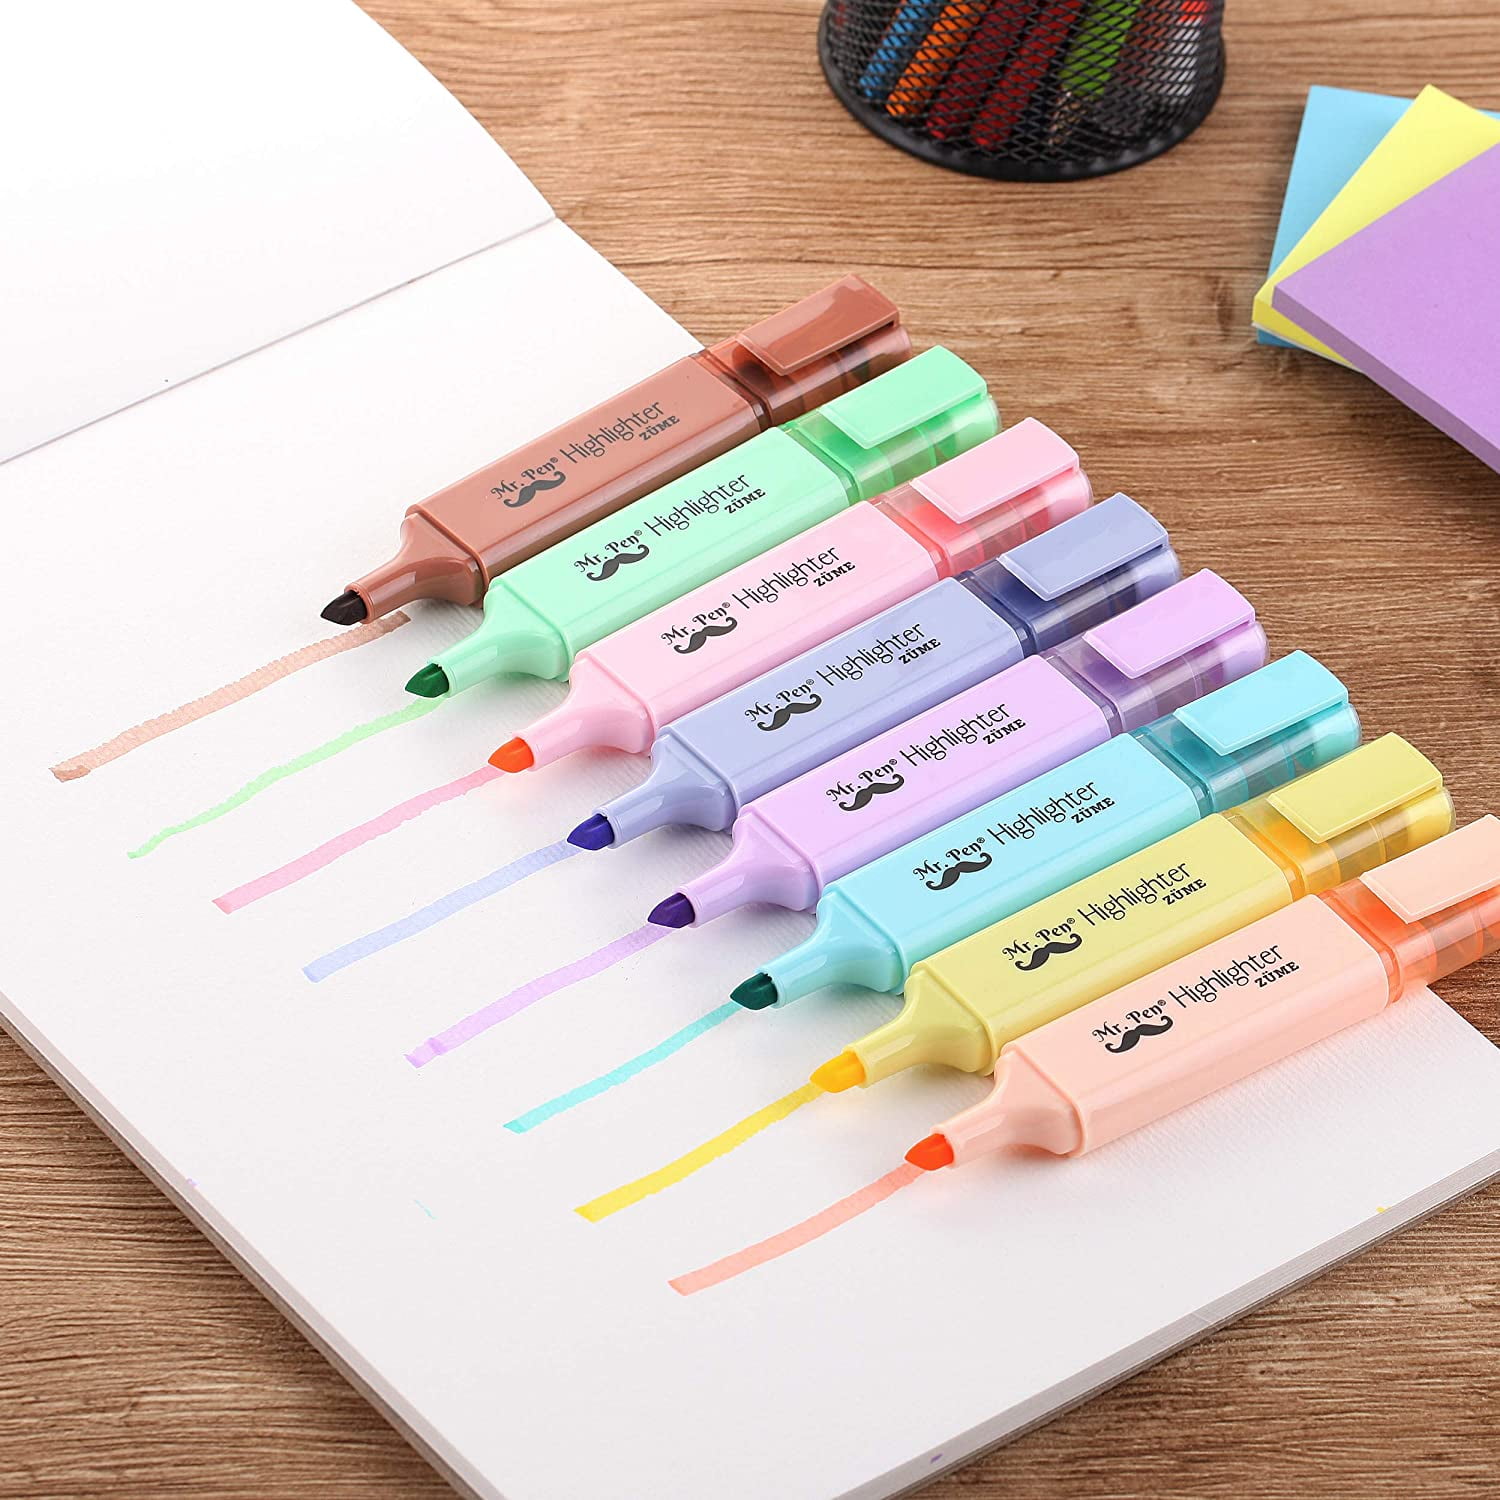 Mr. Pen- Pastel Highlighter, Tank Style, 6 Pack, Chisel Tip, Highlighters Pastel, Bible Highlighter, Multicolor Highlighters Pack, Colored